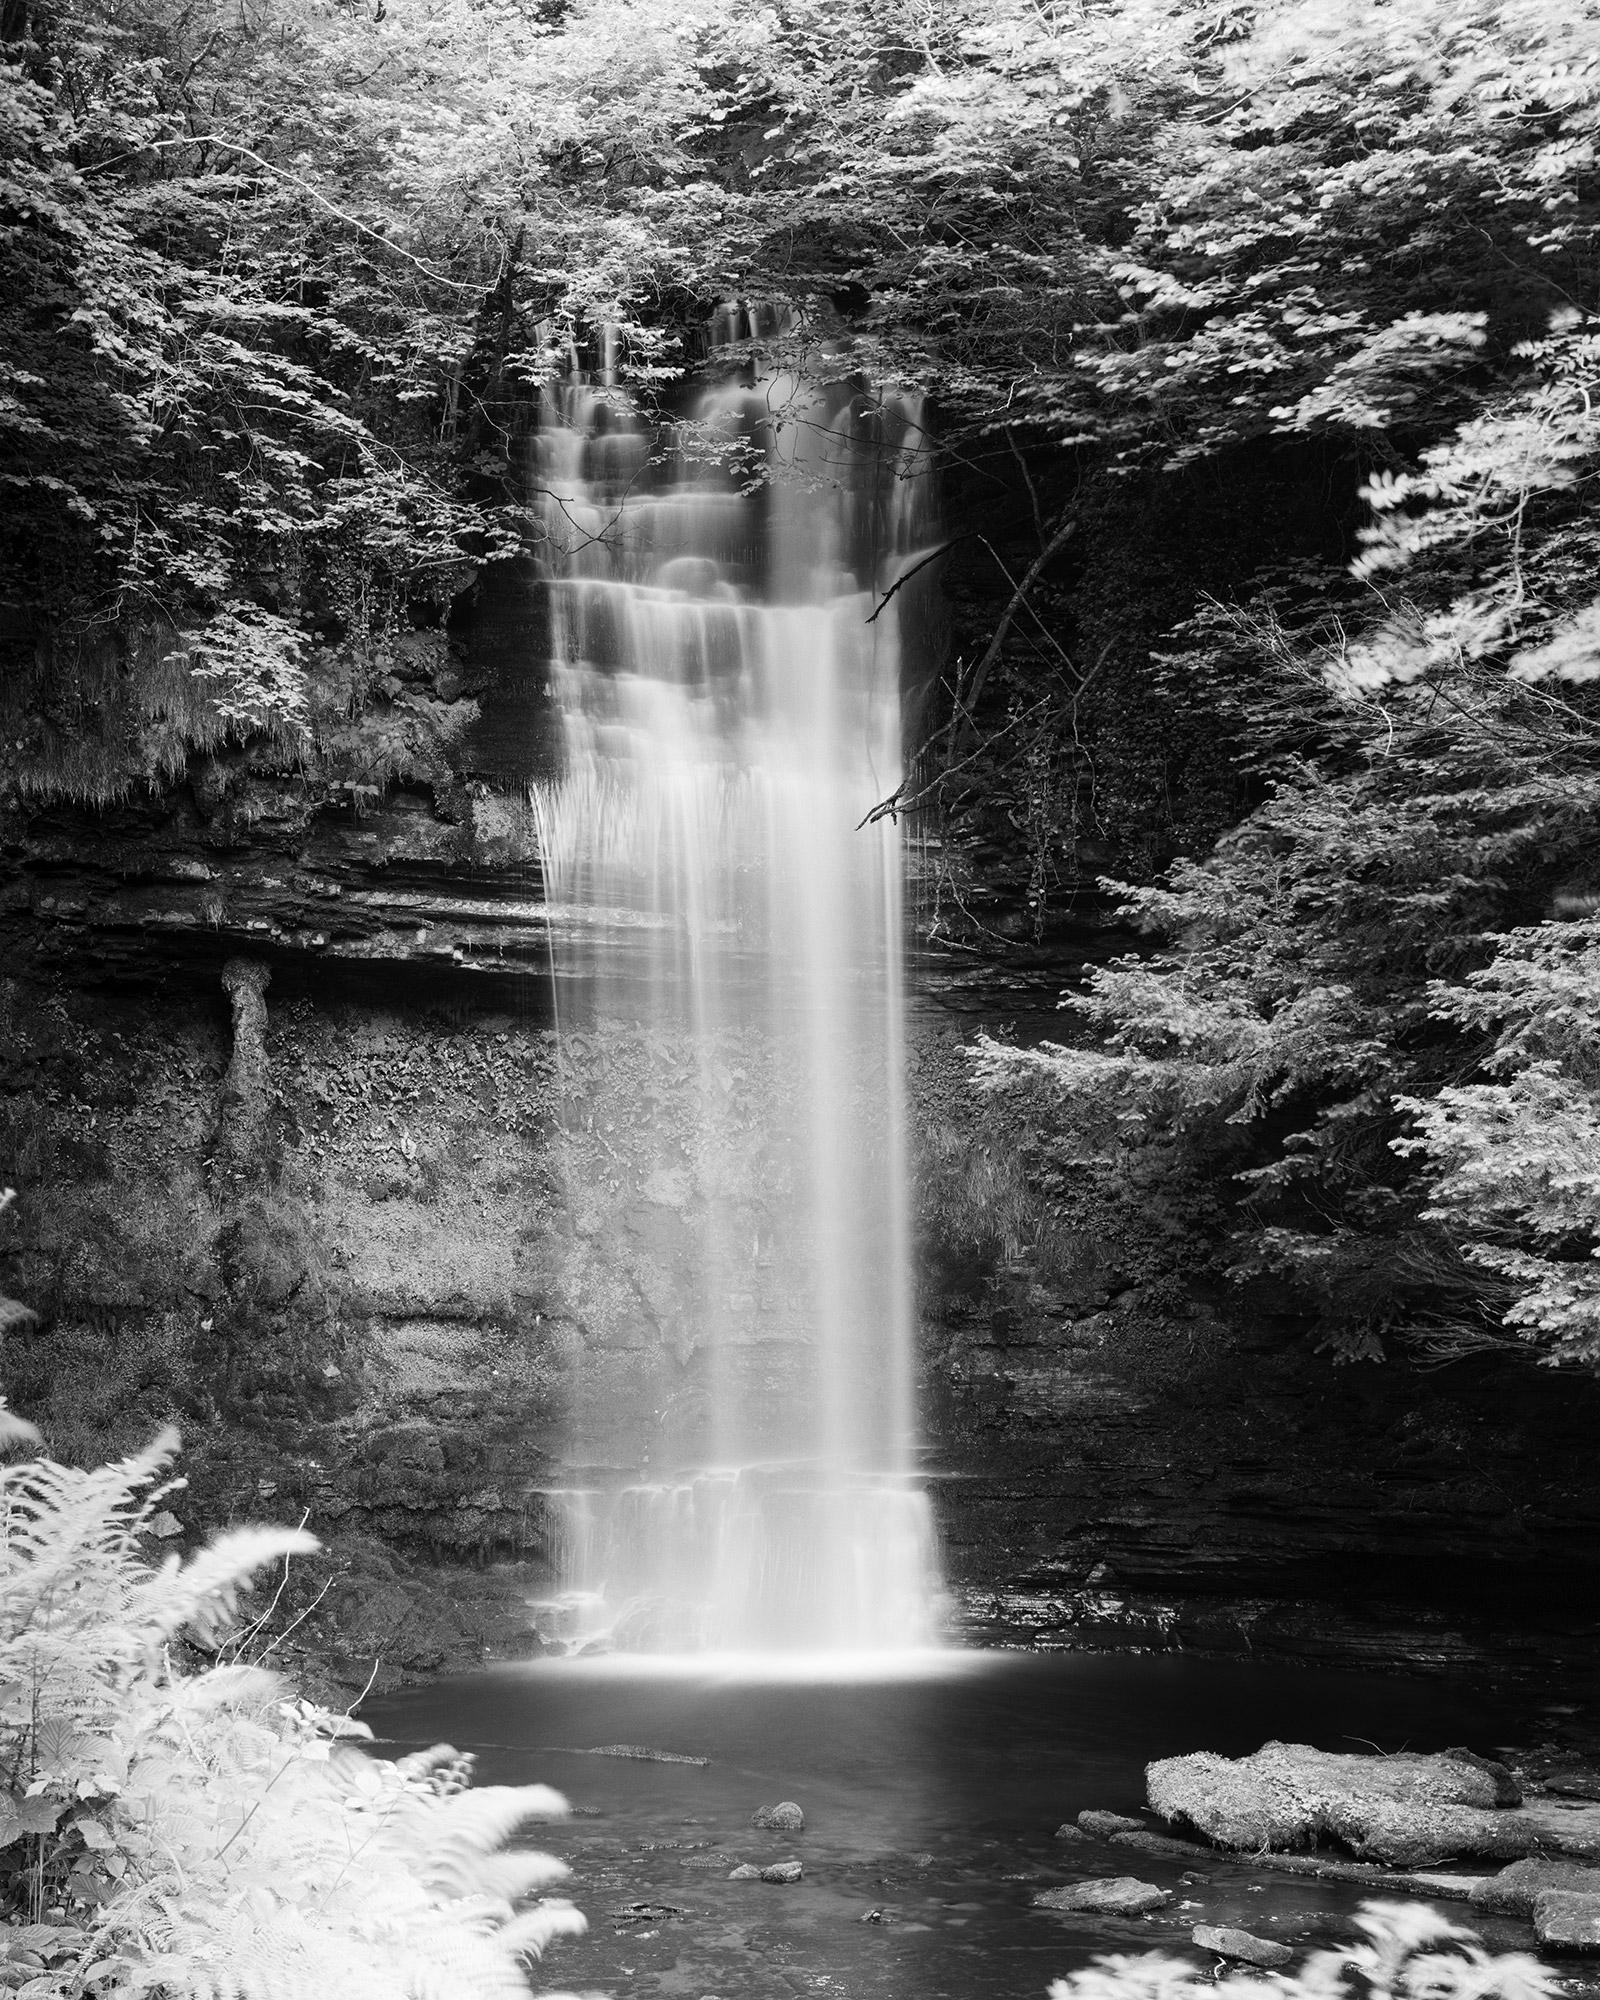 Waterfall, Ireland, fine art contemporary black and white photography landscape